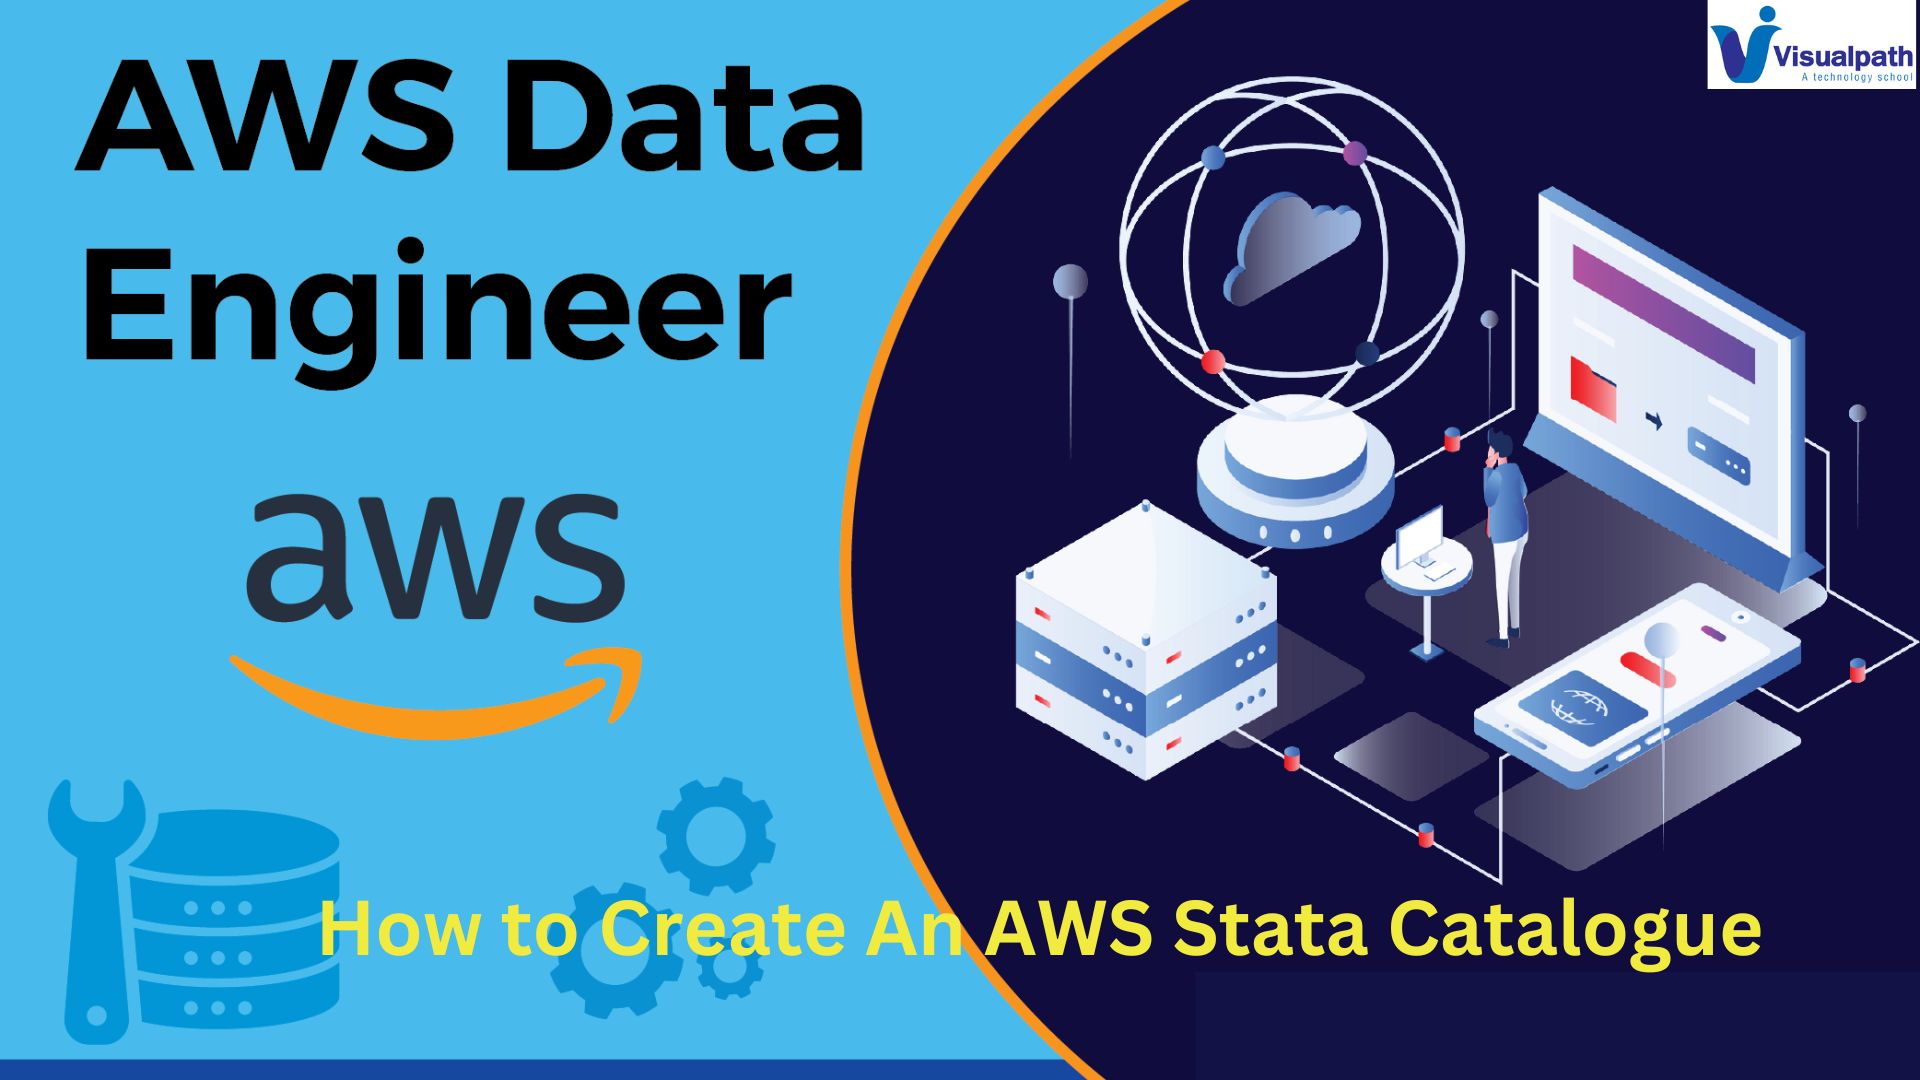 How to Create An AWS Stata Catalogue